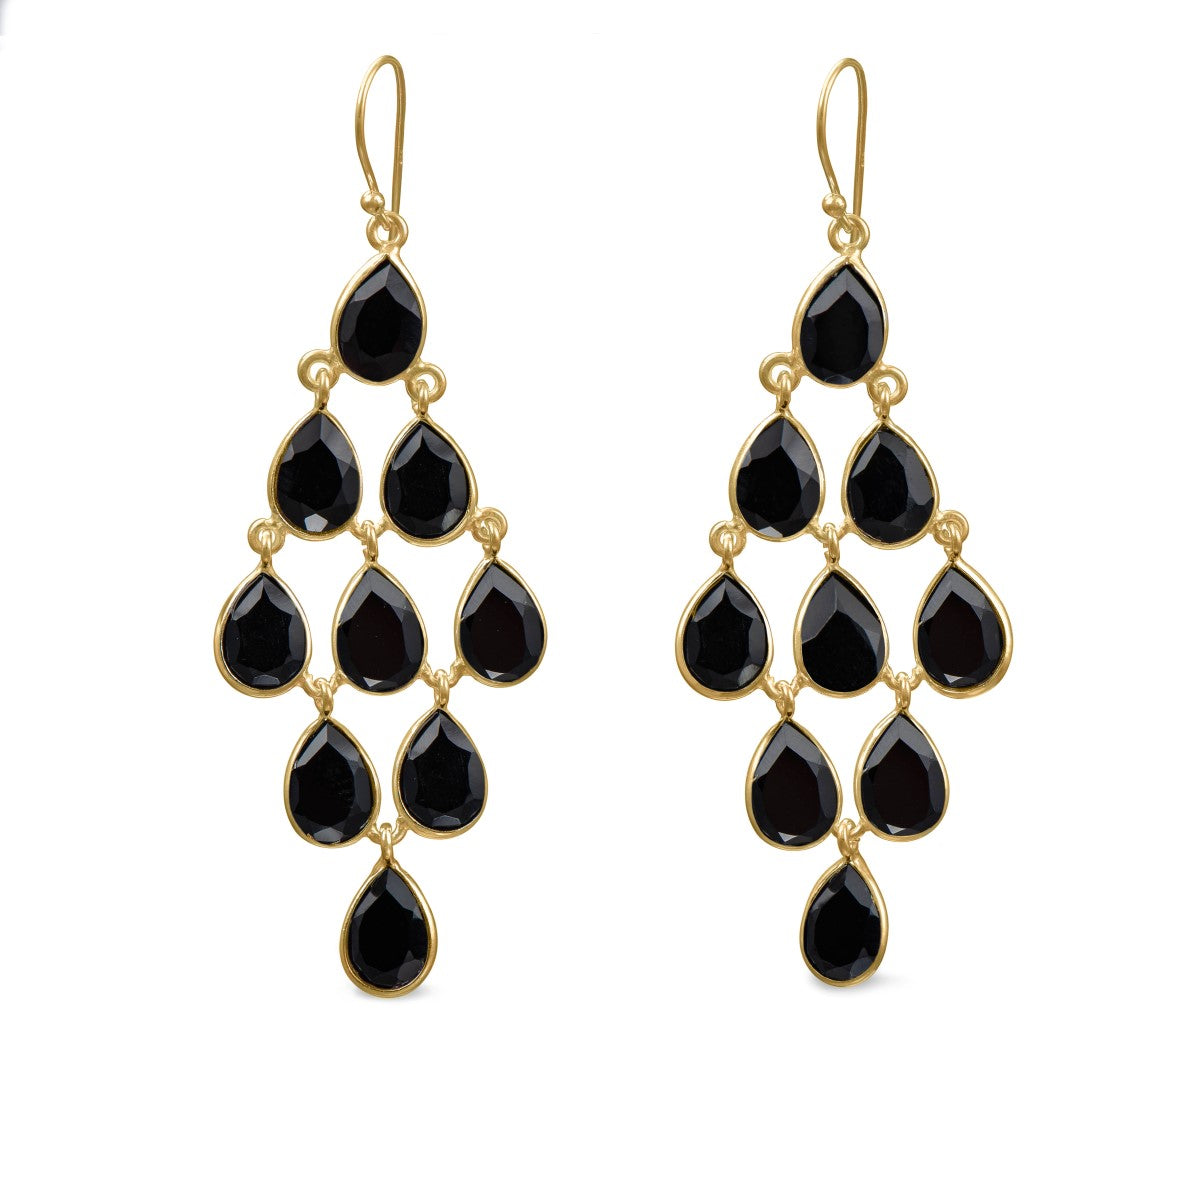 Gold Plated Sterling Silver Chandelier Earrings with Natural Gemstones  - Black Onyx